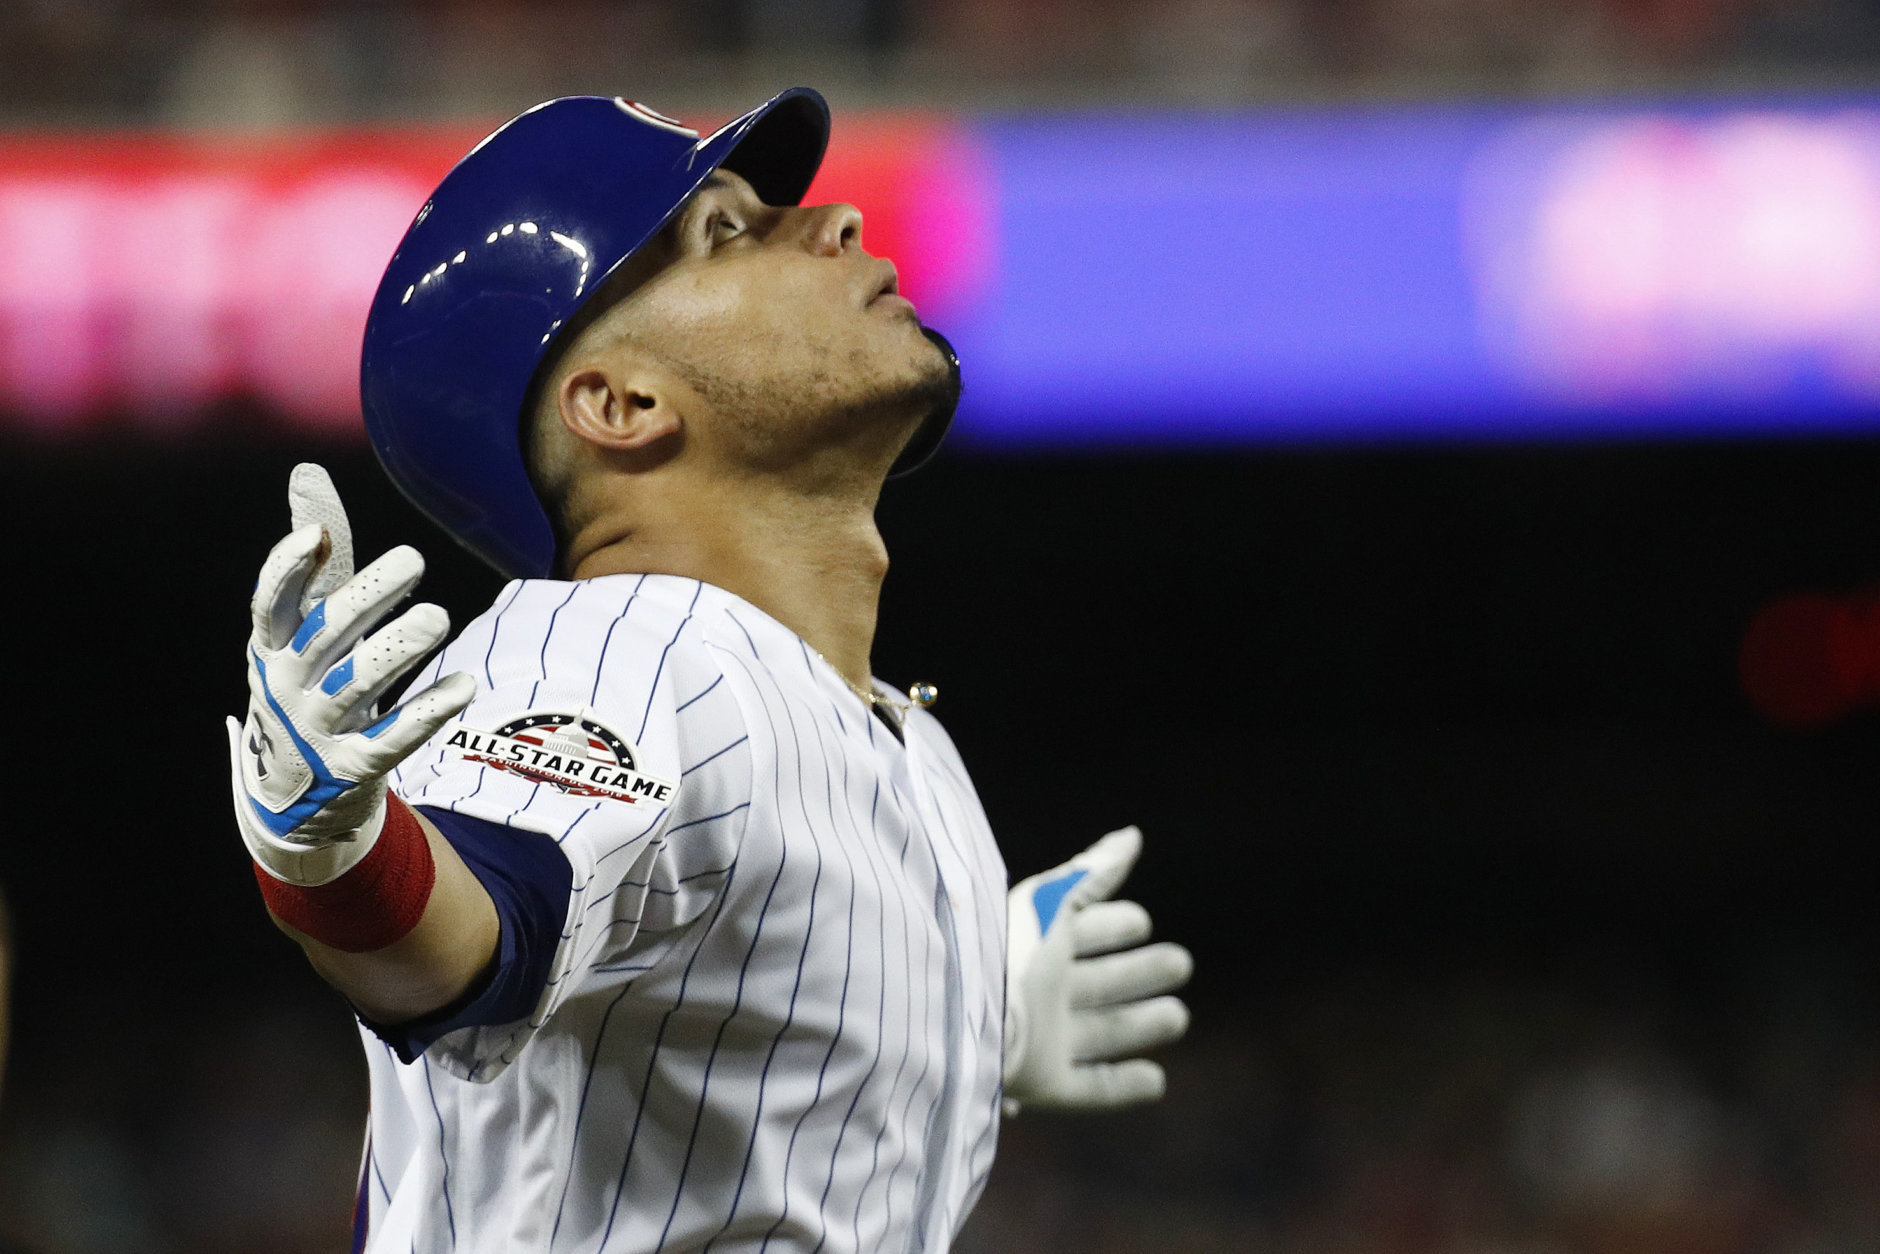 Chicago Cubs catcher Willson Contreras (40) celebrates this third inning solo home run during the Major League Baseball All-star Game, Tuesday, July 17, 2018 in Washington. (AP Photo/Patrick Semansky)